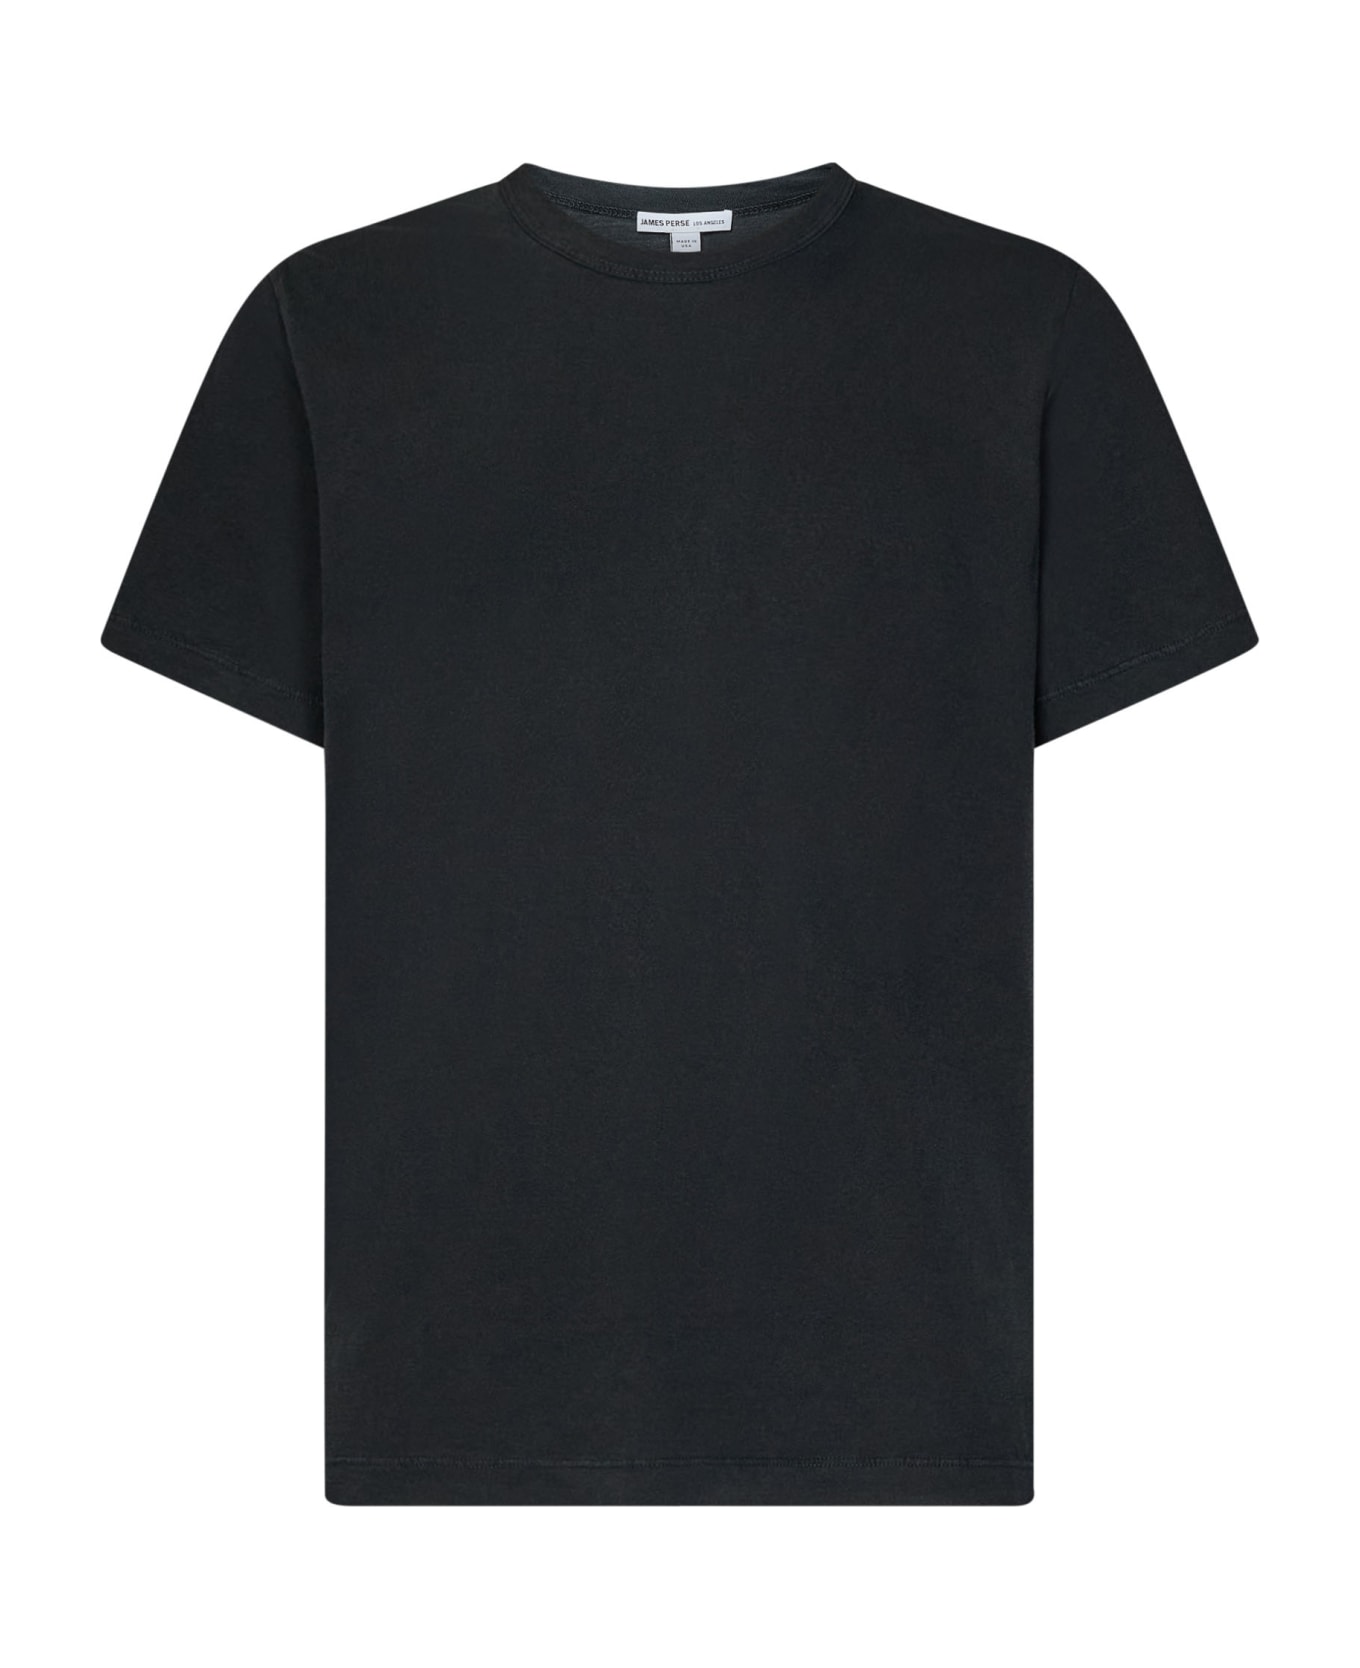 James Perse T-shirt - Carbone